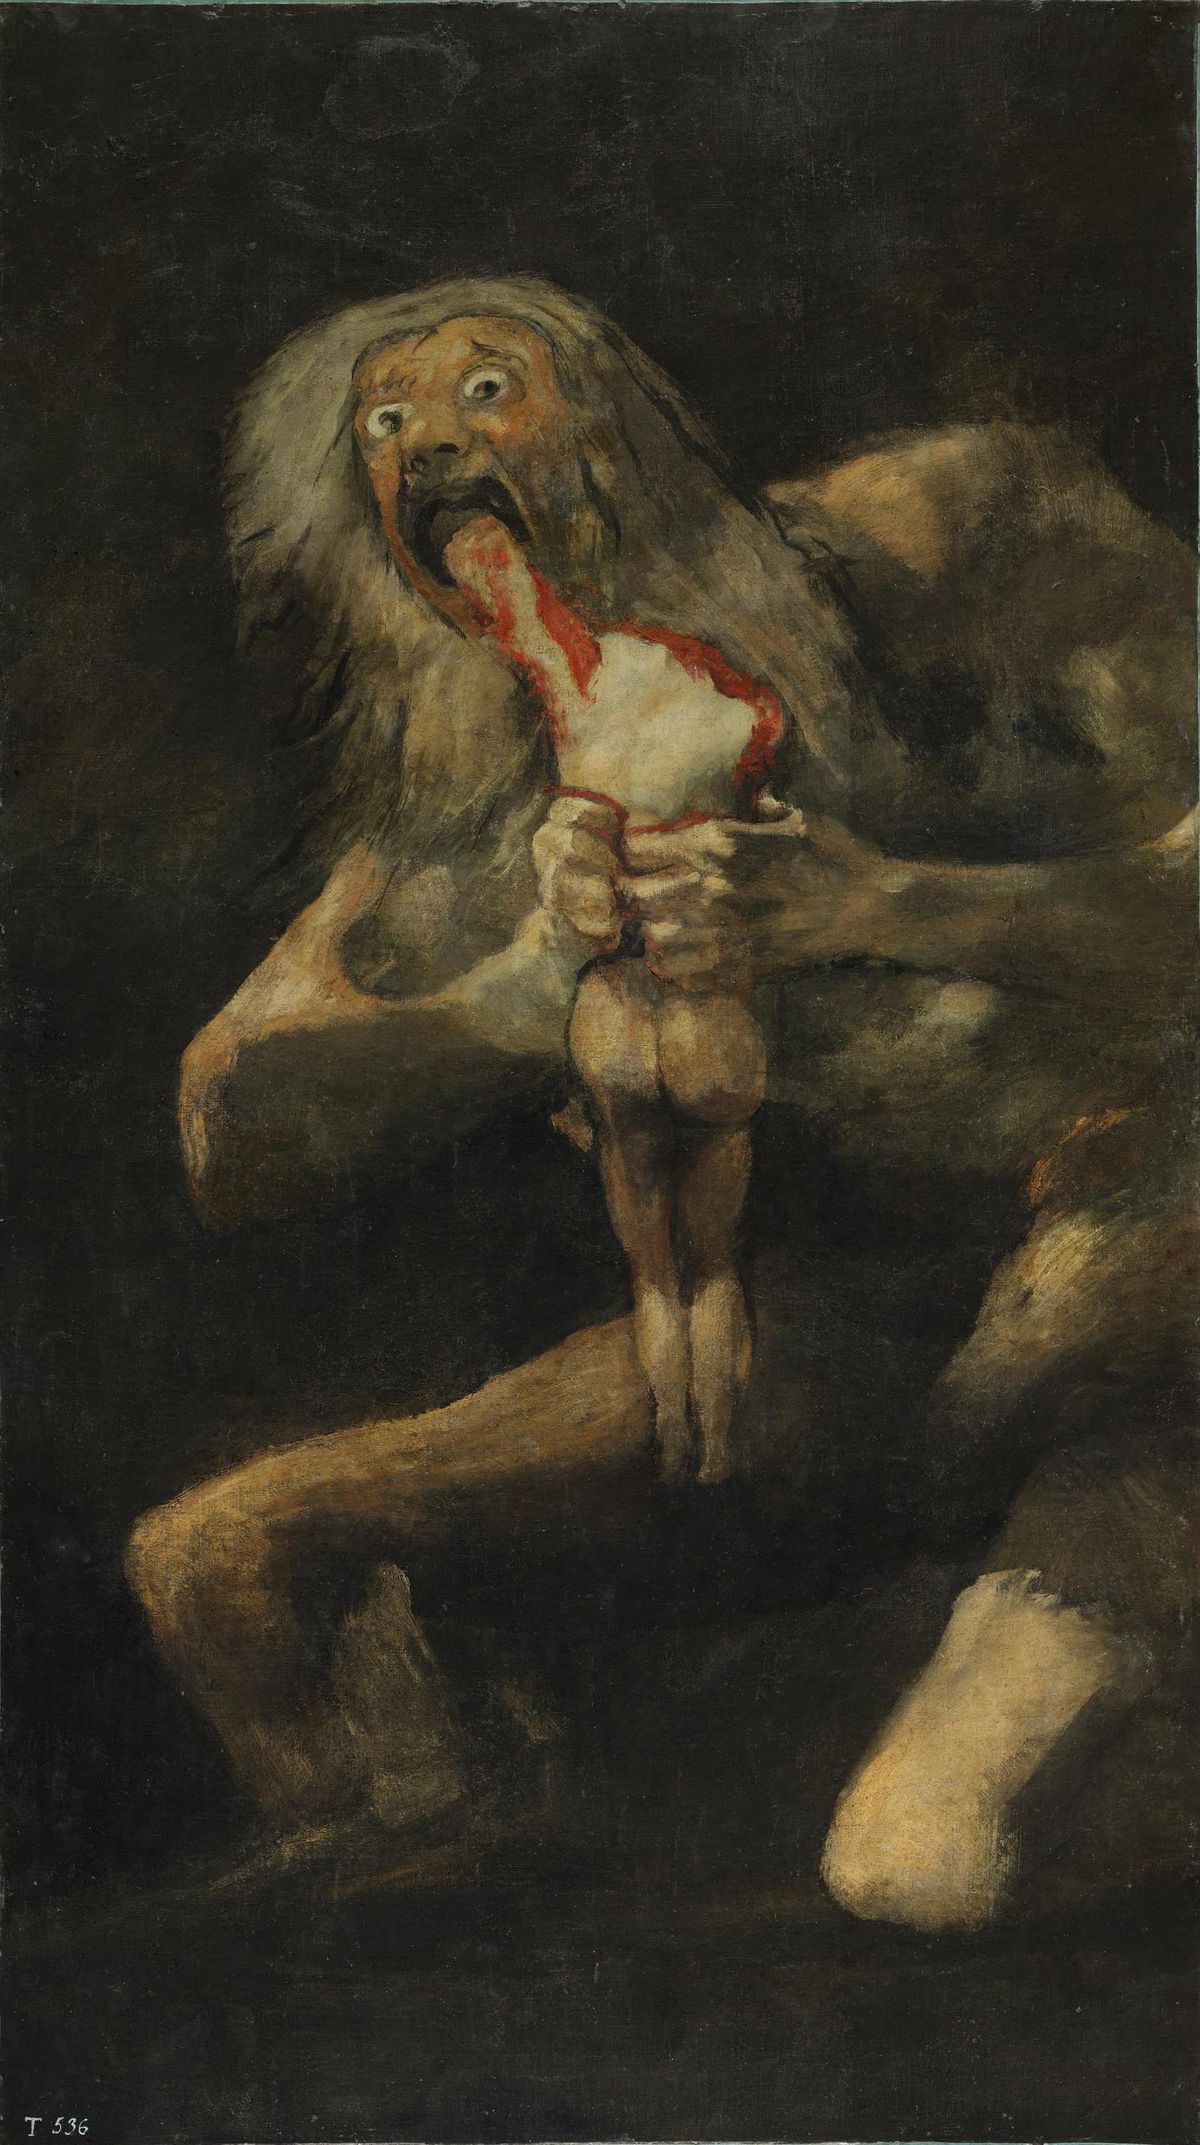 Goya depicts Saturn feasting upon one of his sons, with the child’s head already consumed. The titan is on the point of taking another bite from the left arm; he looms from the darkness, mouth agape and his eyes bulging widely.